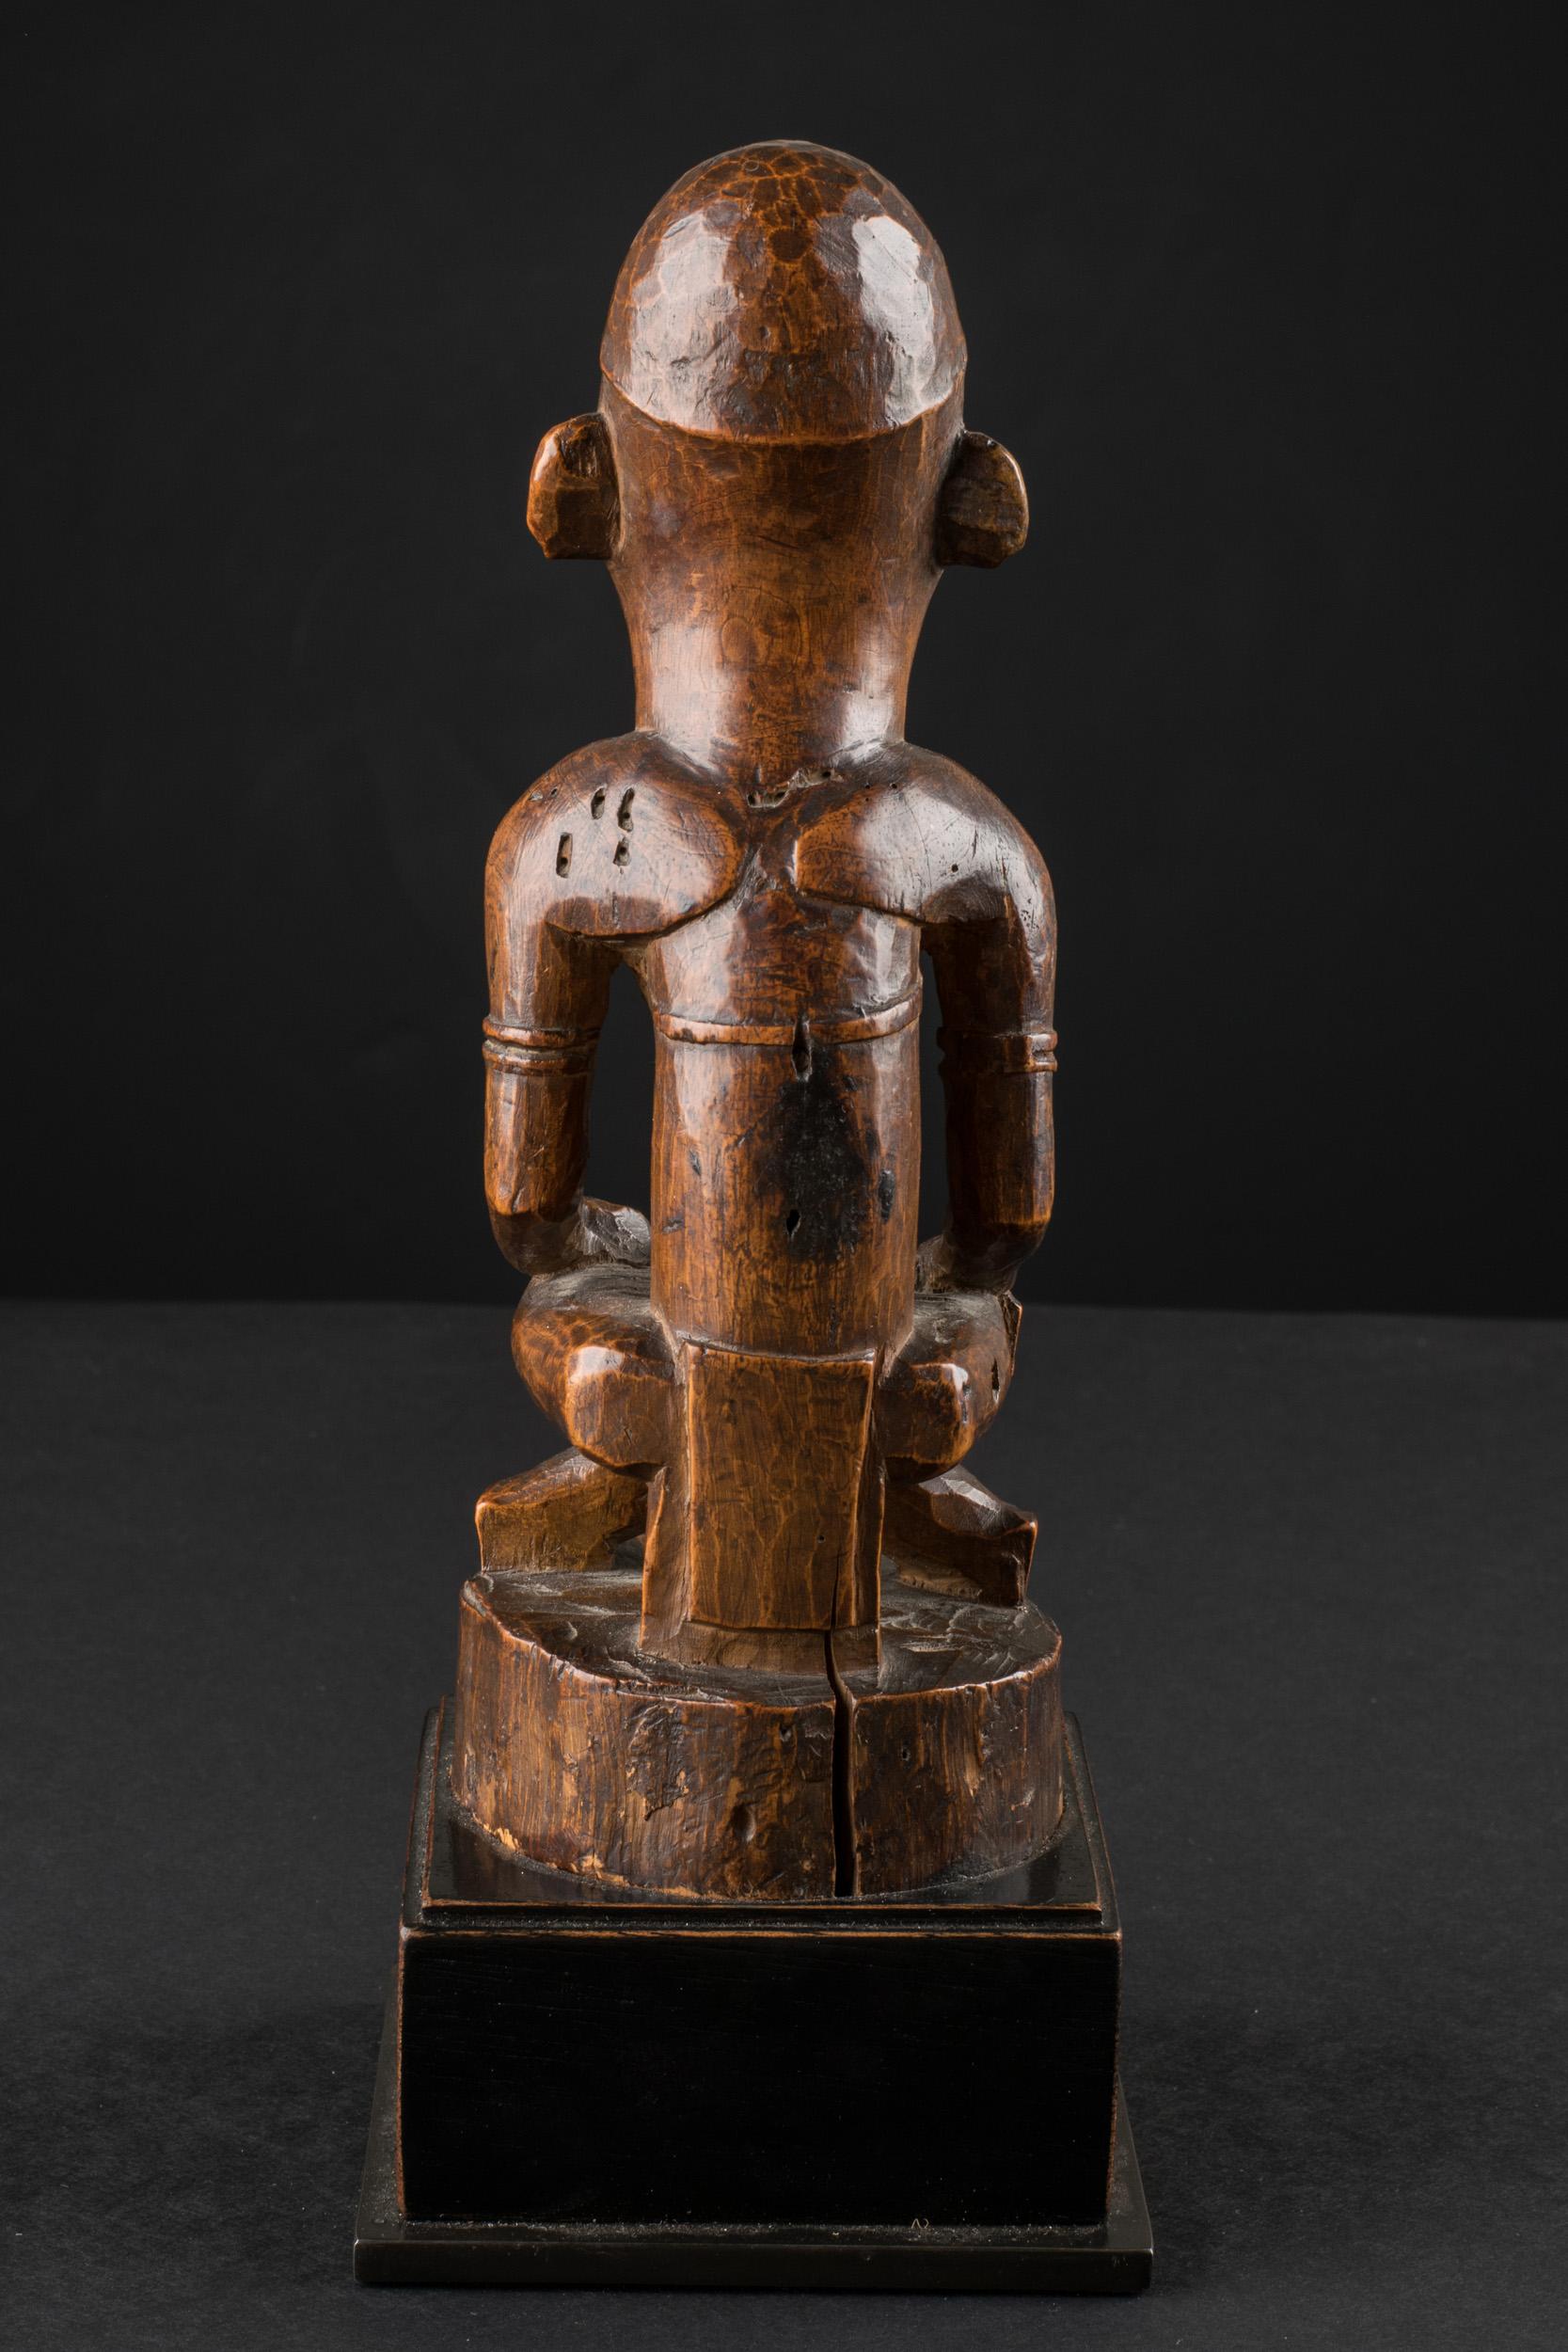 what is the significance of the mother and child figure from the kongo from the late 19th century